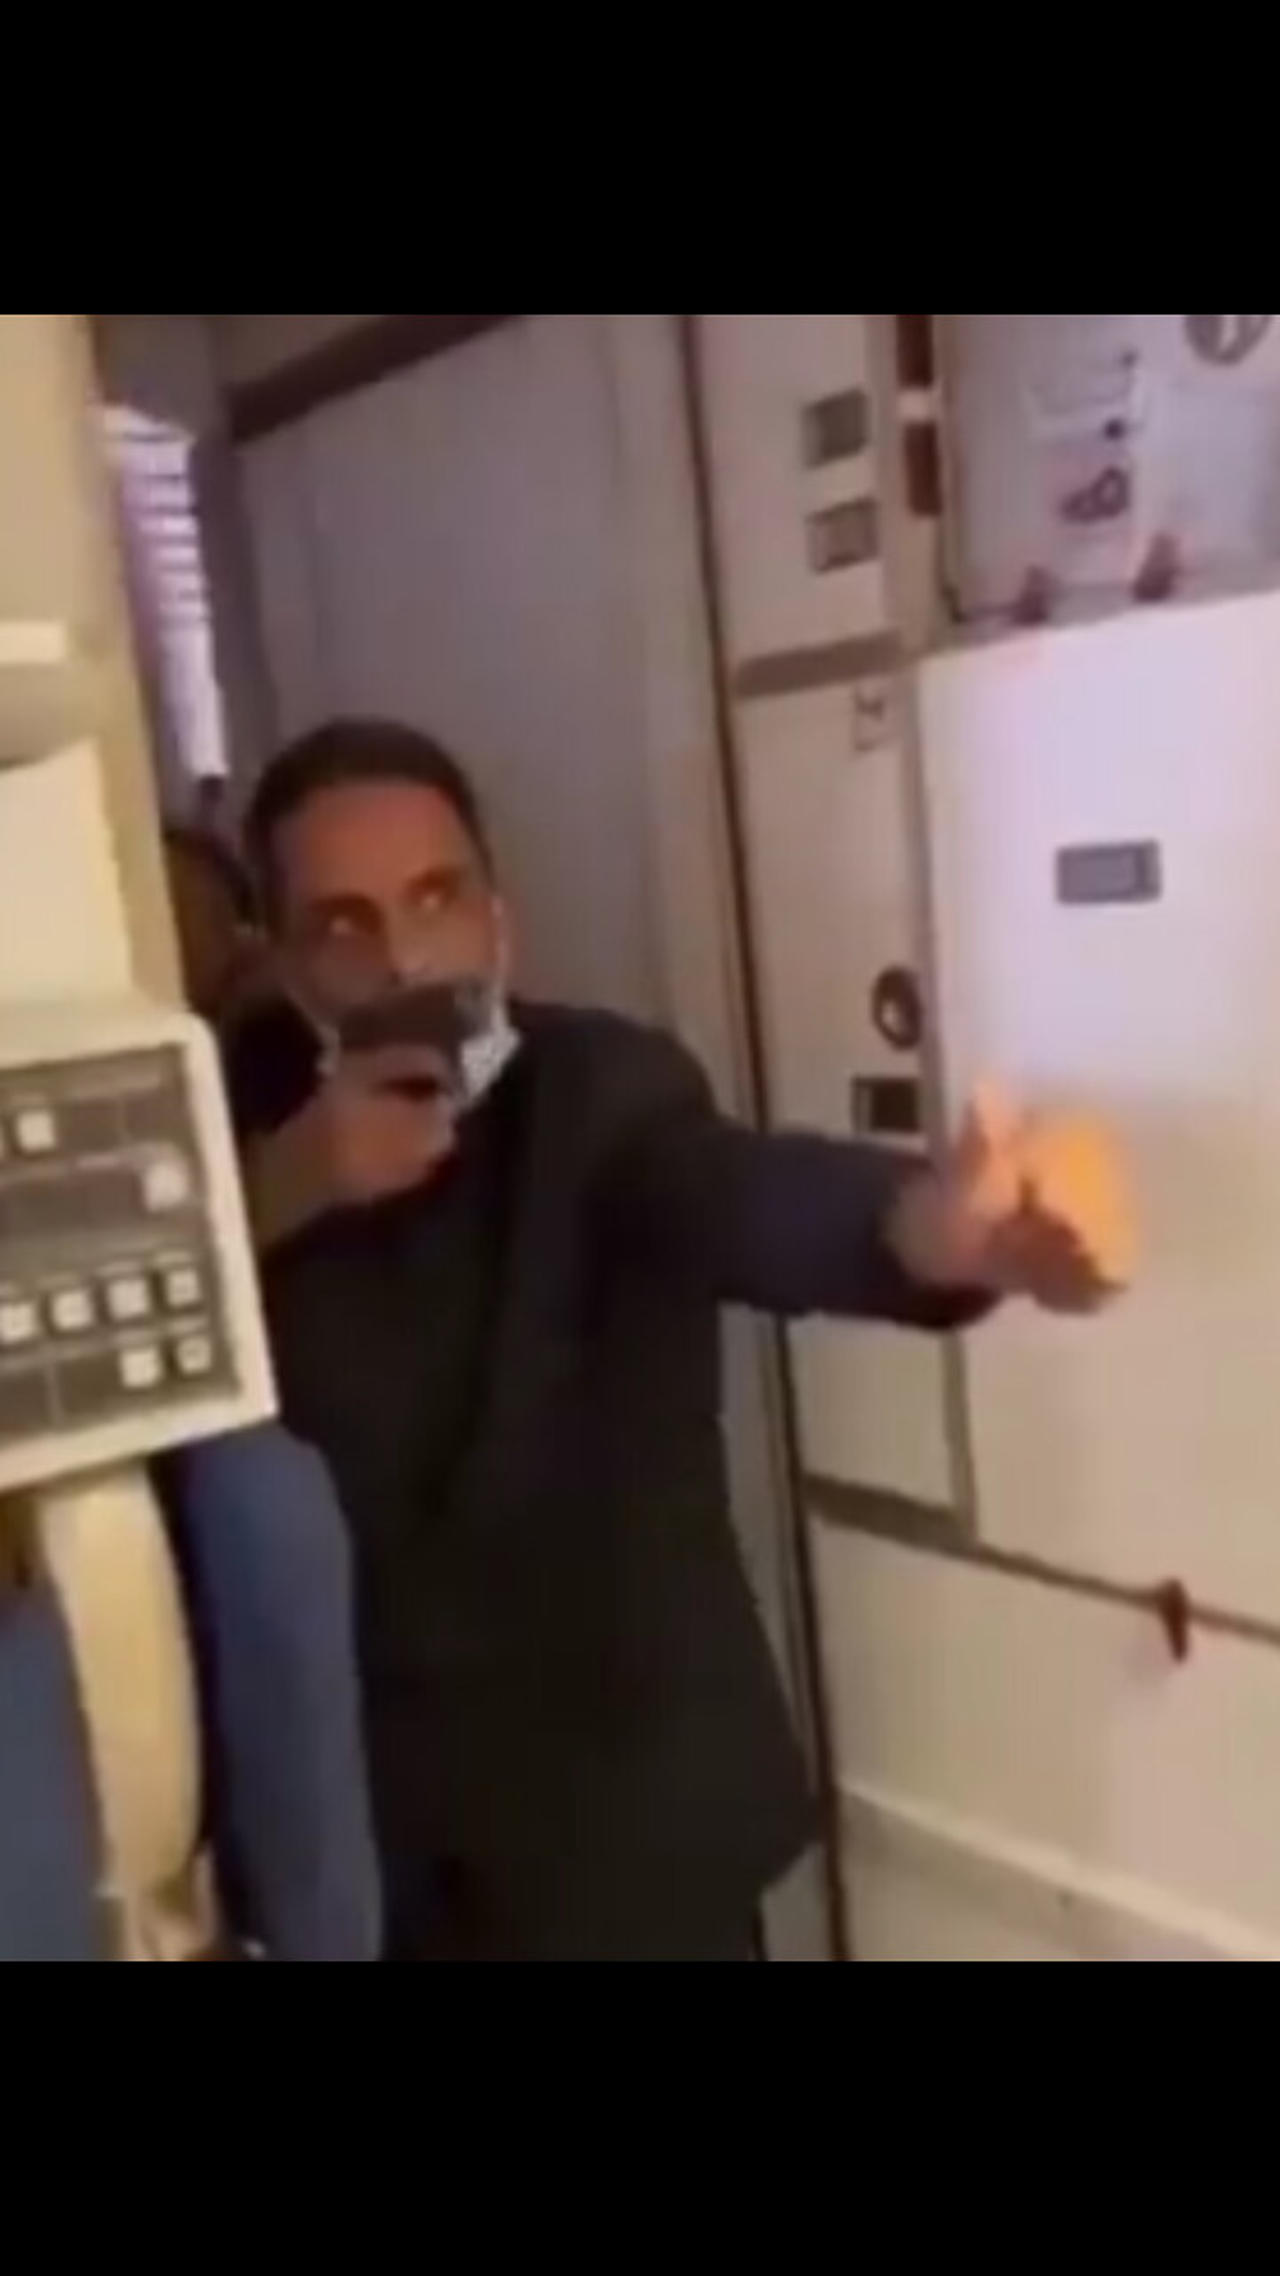 Air marshal was compelled to draw weapon after passengers attempted to enter the cockpit.